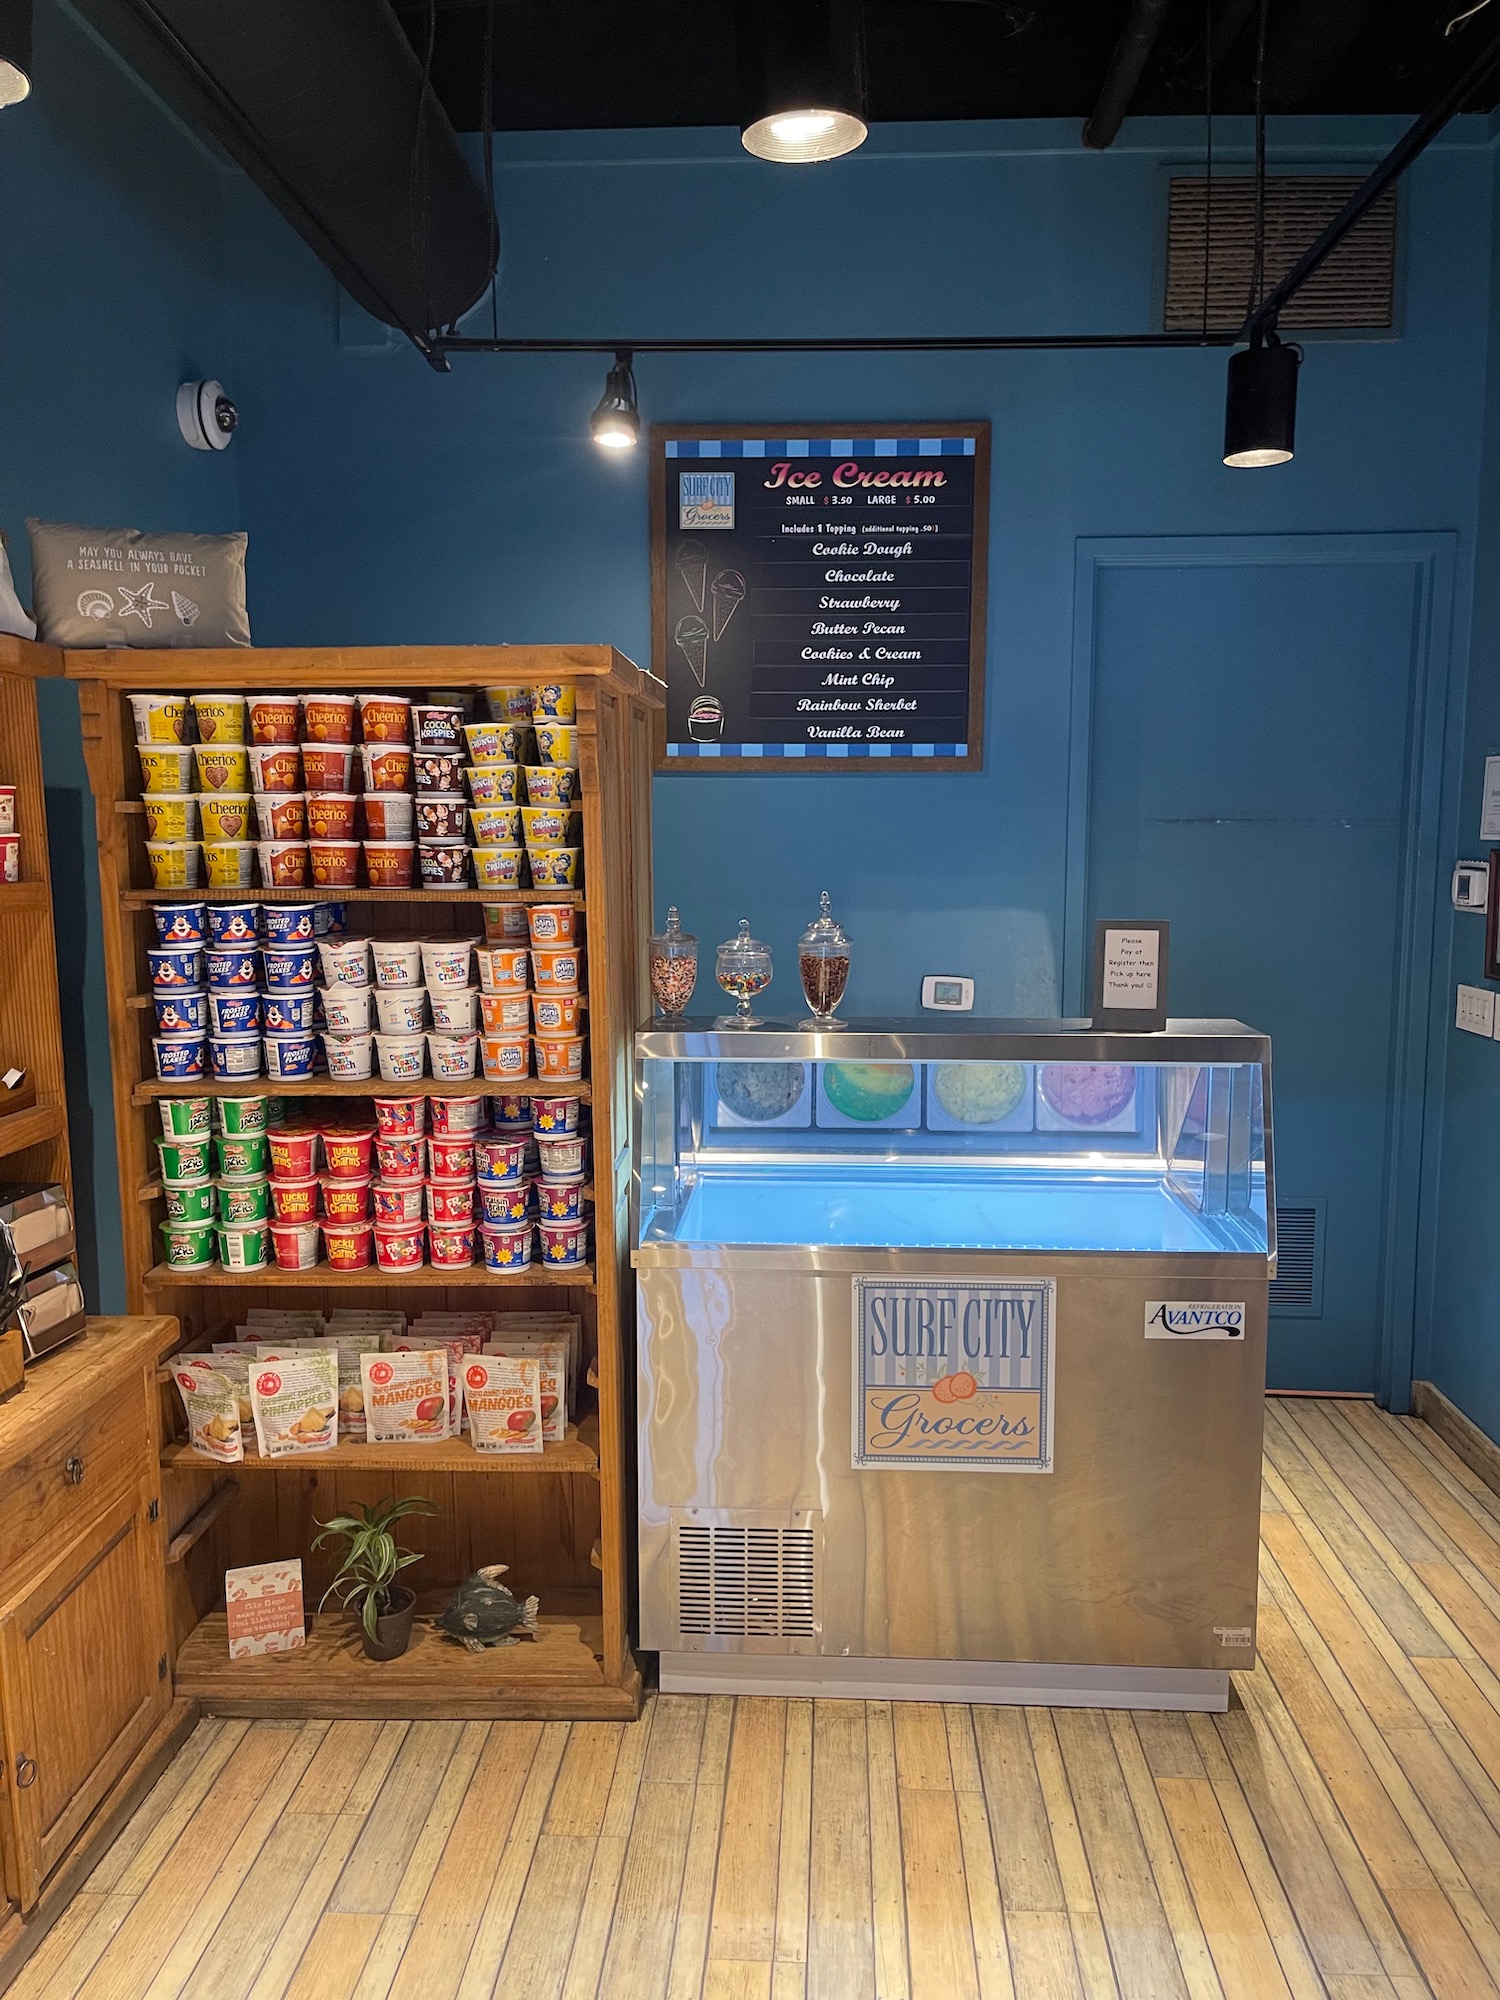 a ice cream cooler and shelves in a room